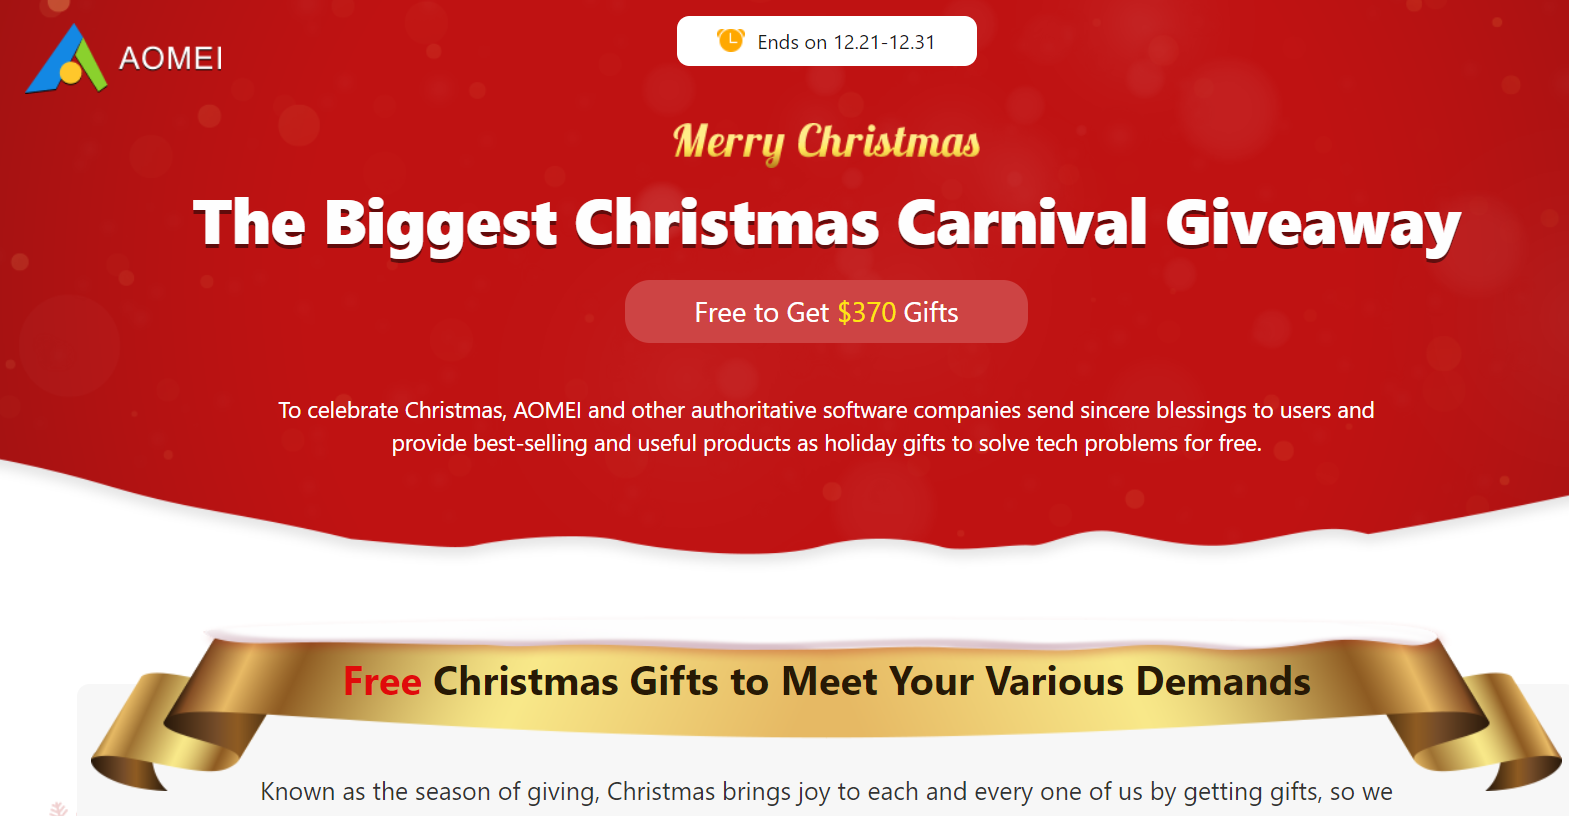 aomei-the-biggest-christmas-carnival-giveaway